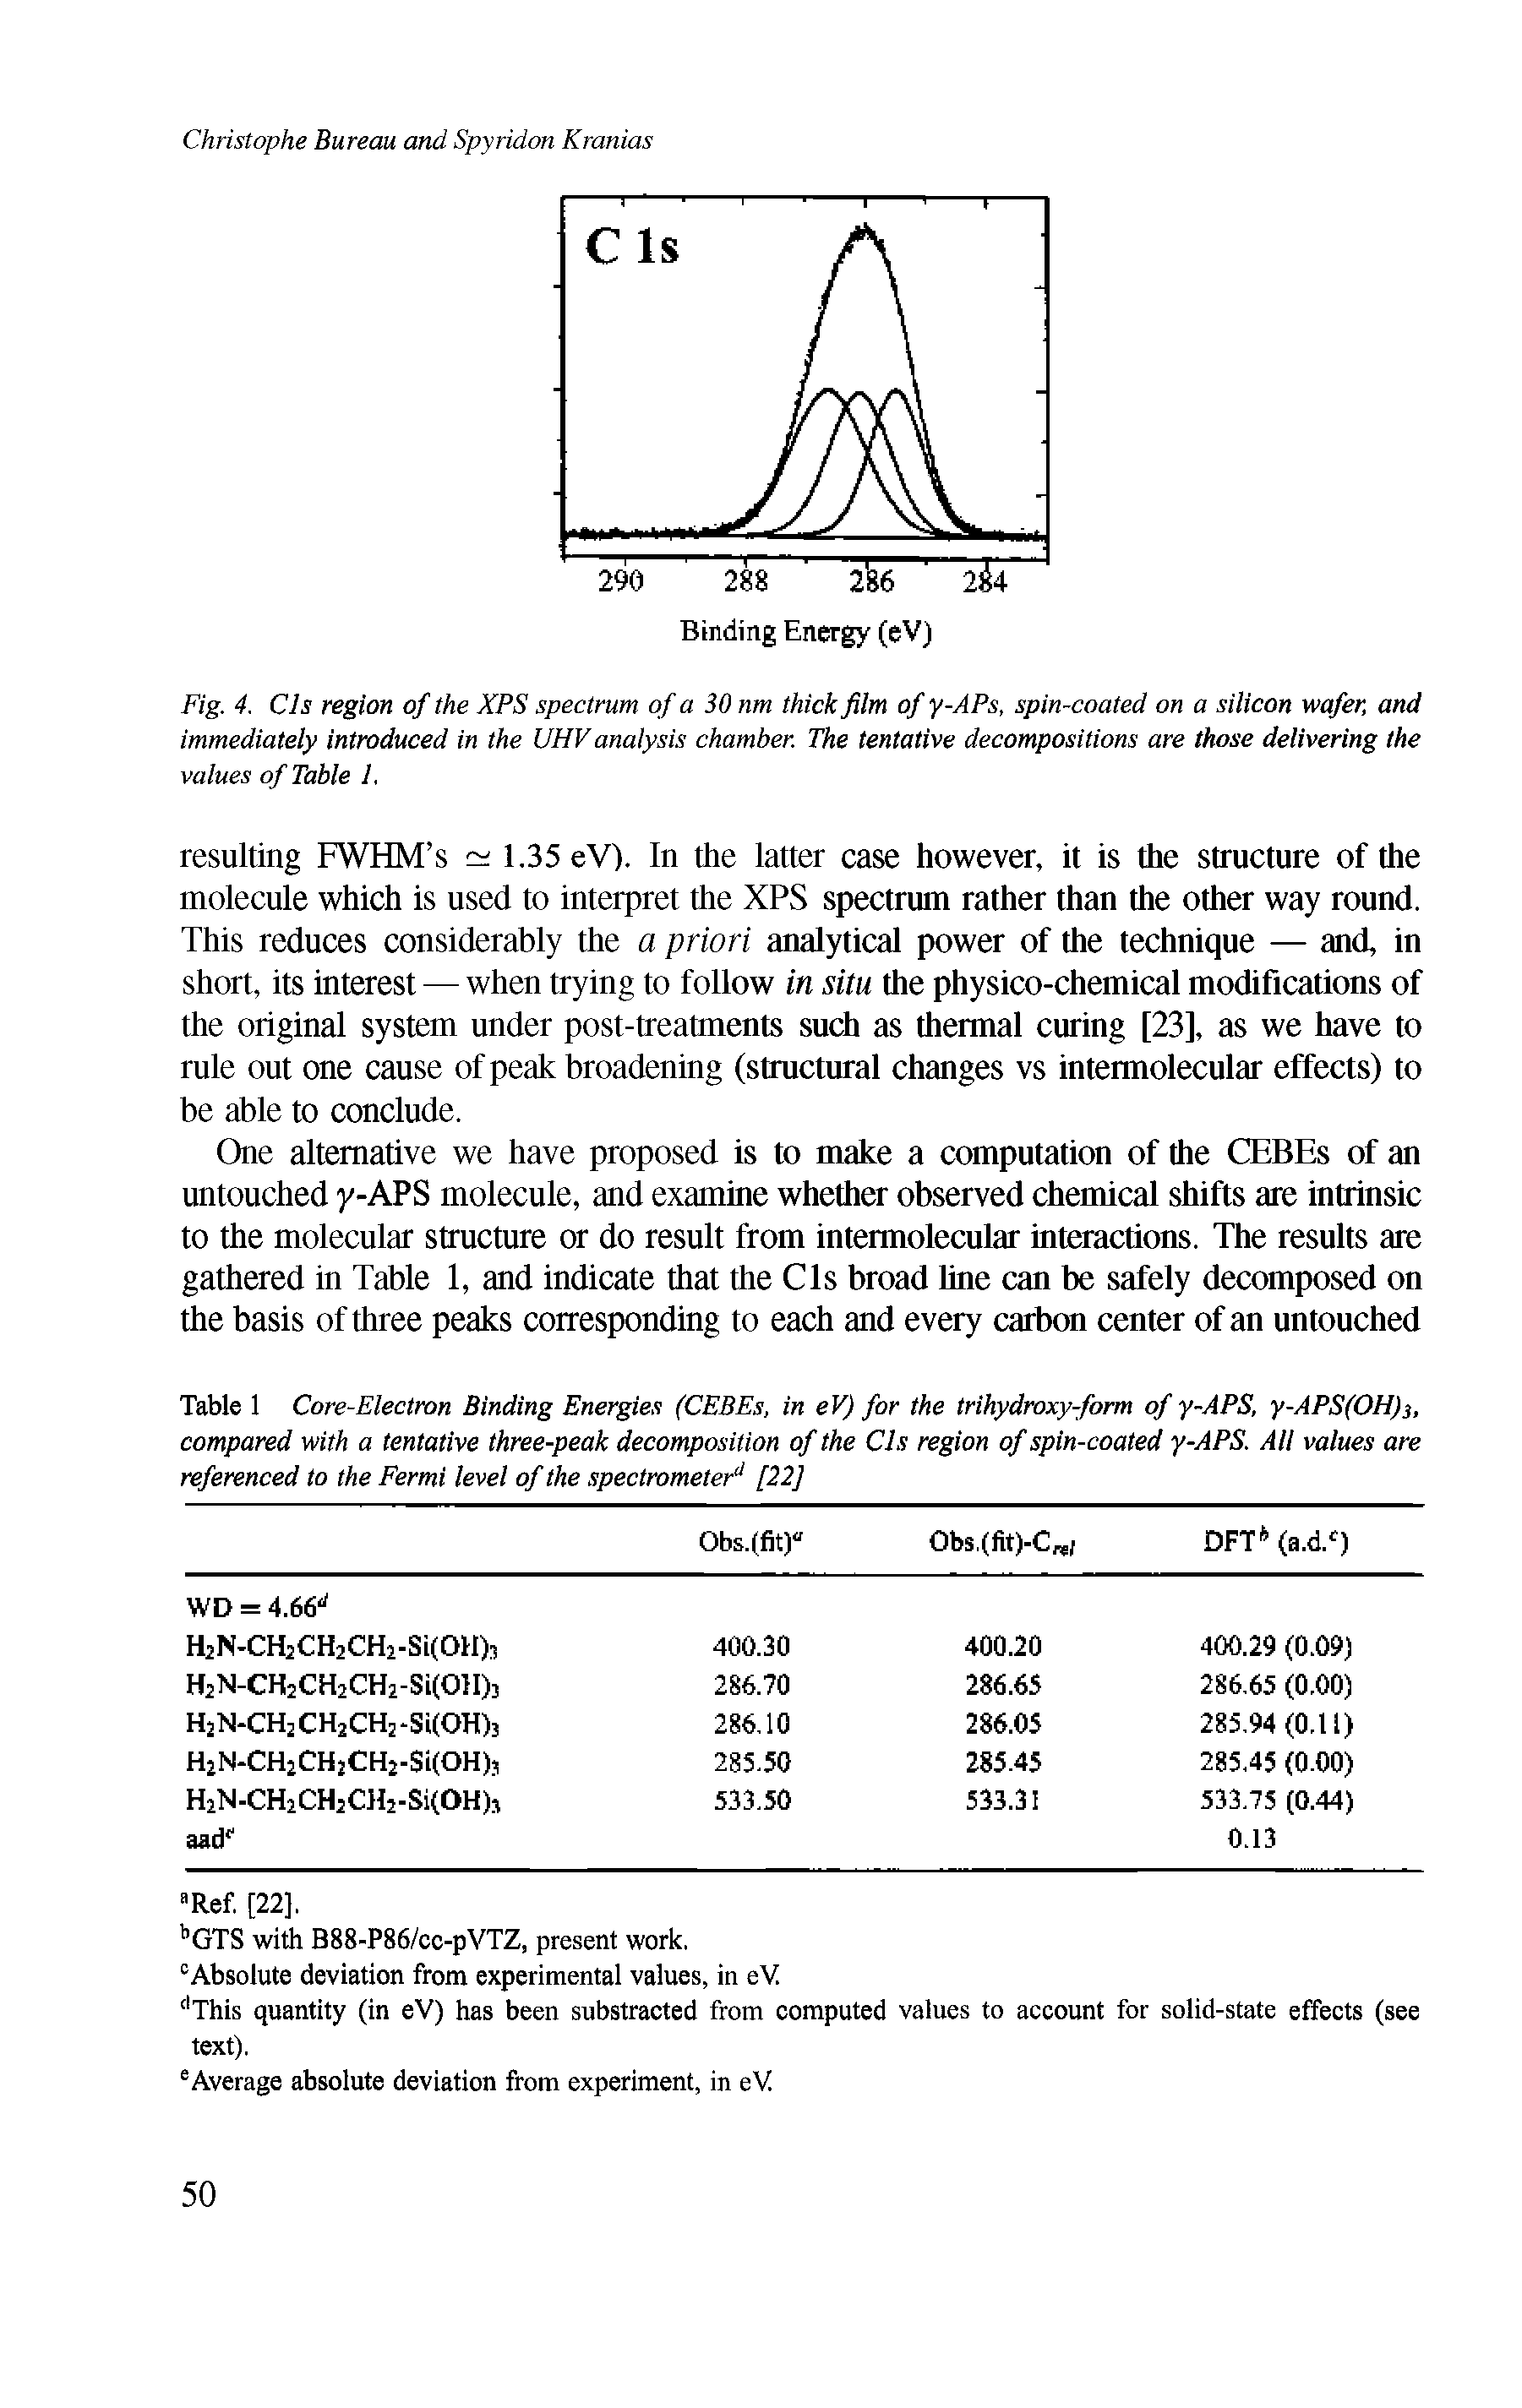 Table 1 Core-Electron Binding Energies (CEBEs, in eV) for the trihydroxy-form of y-APS, y-APS(OH)s, compared with a tentative three-peak decomposition of the Cls region of spin-coated y-APS. All values are referenced to the Fermi level of the spectrometer [22]...